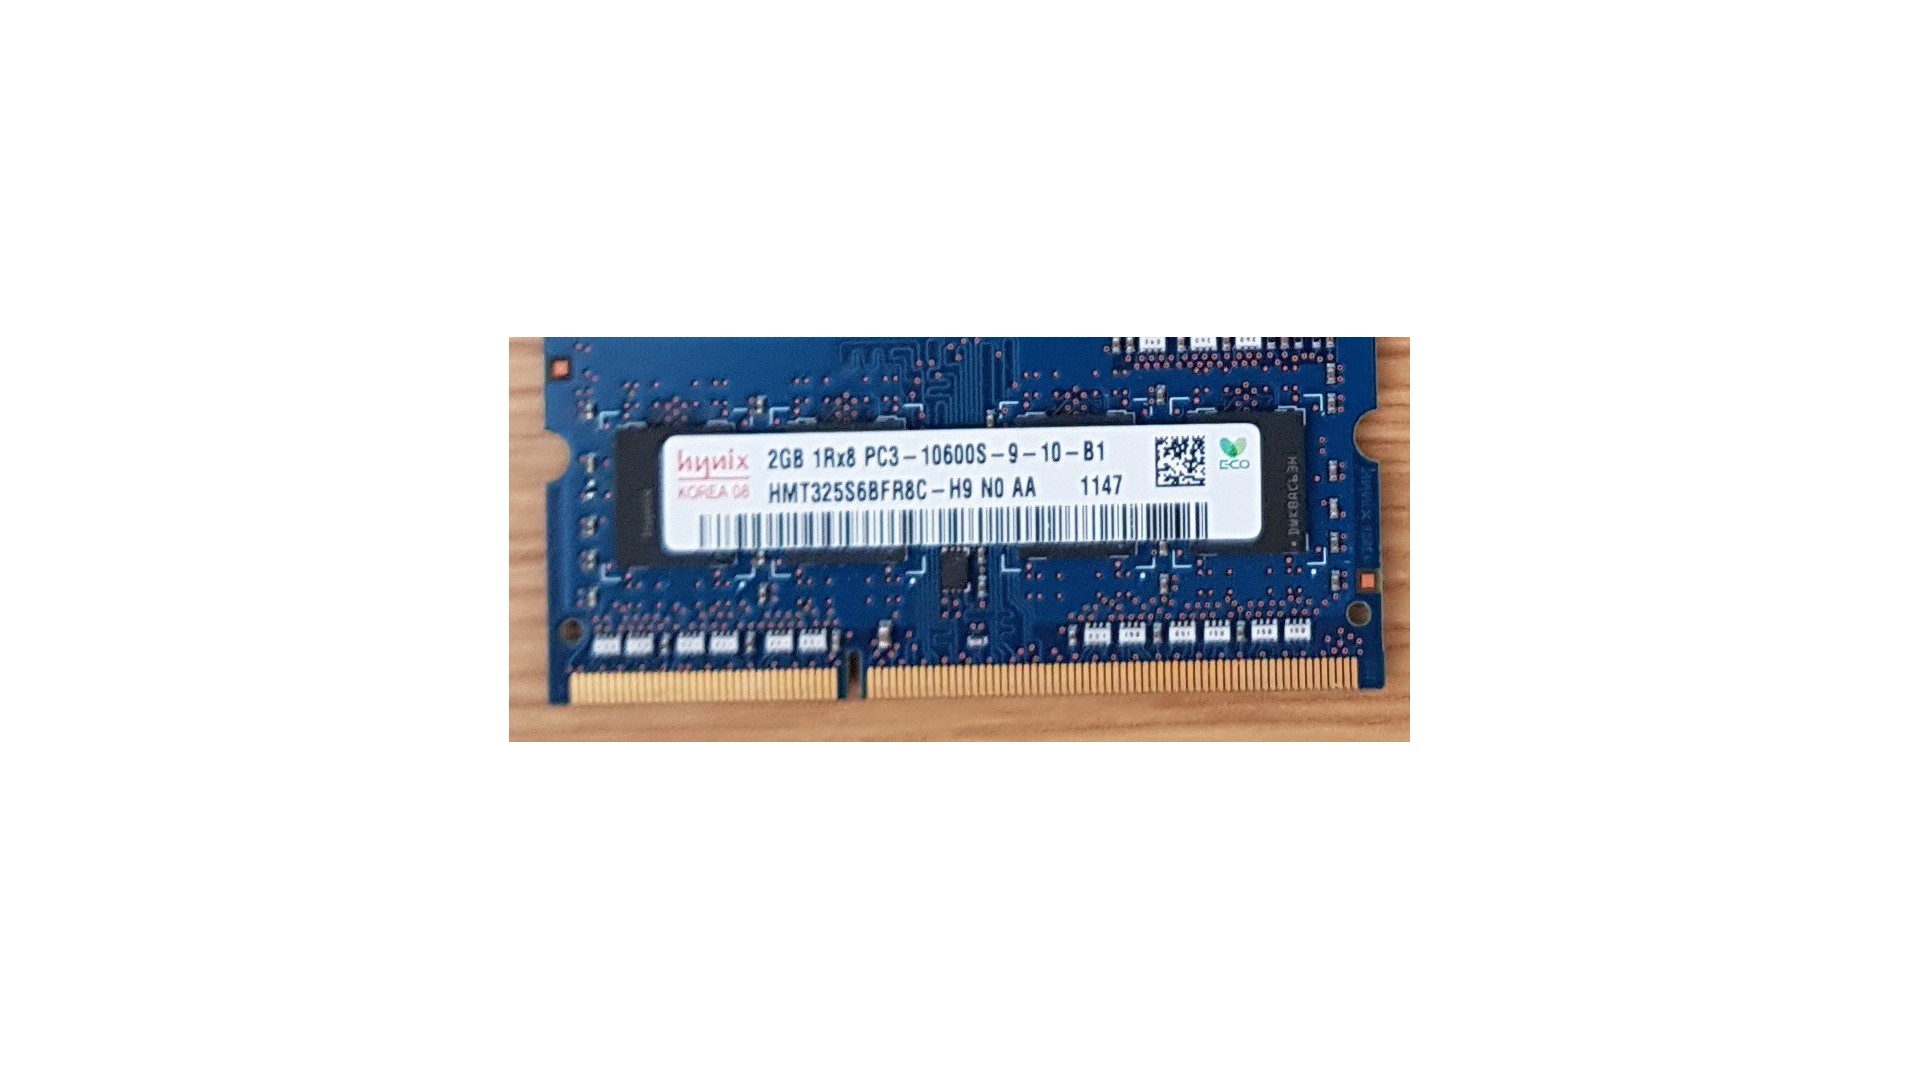 2GB DDR3 10600S 1333 SO-DIMM mixed